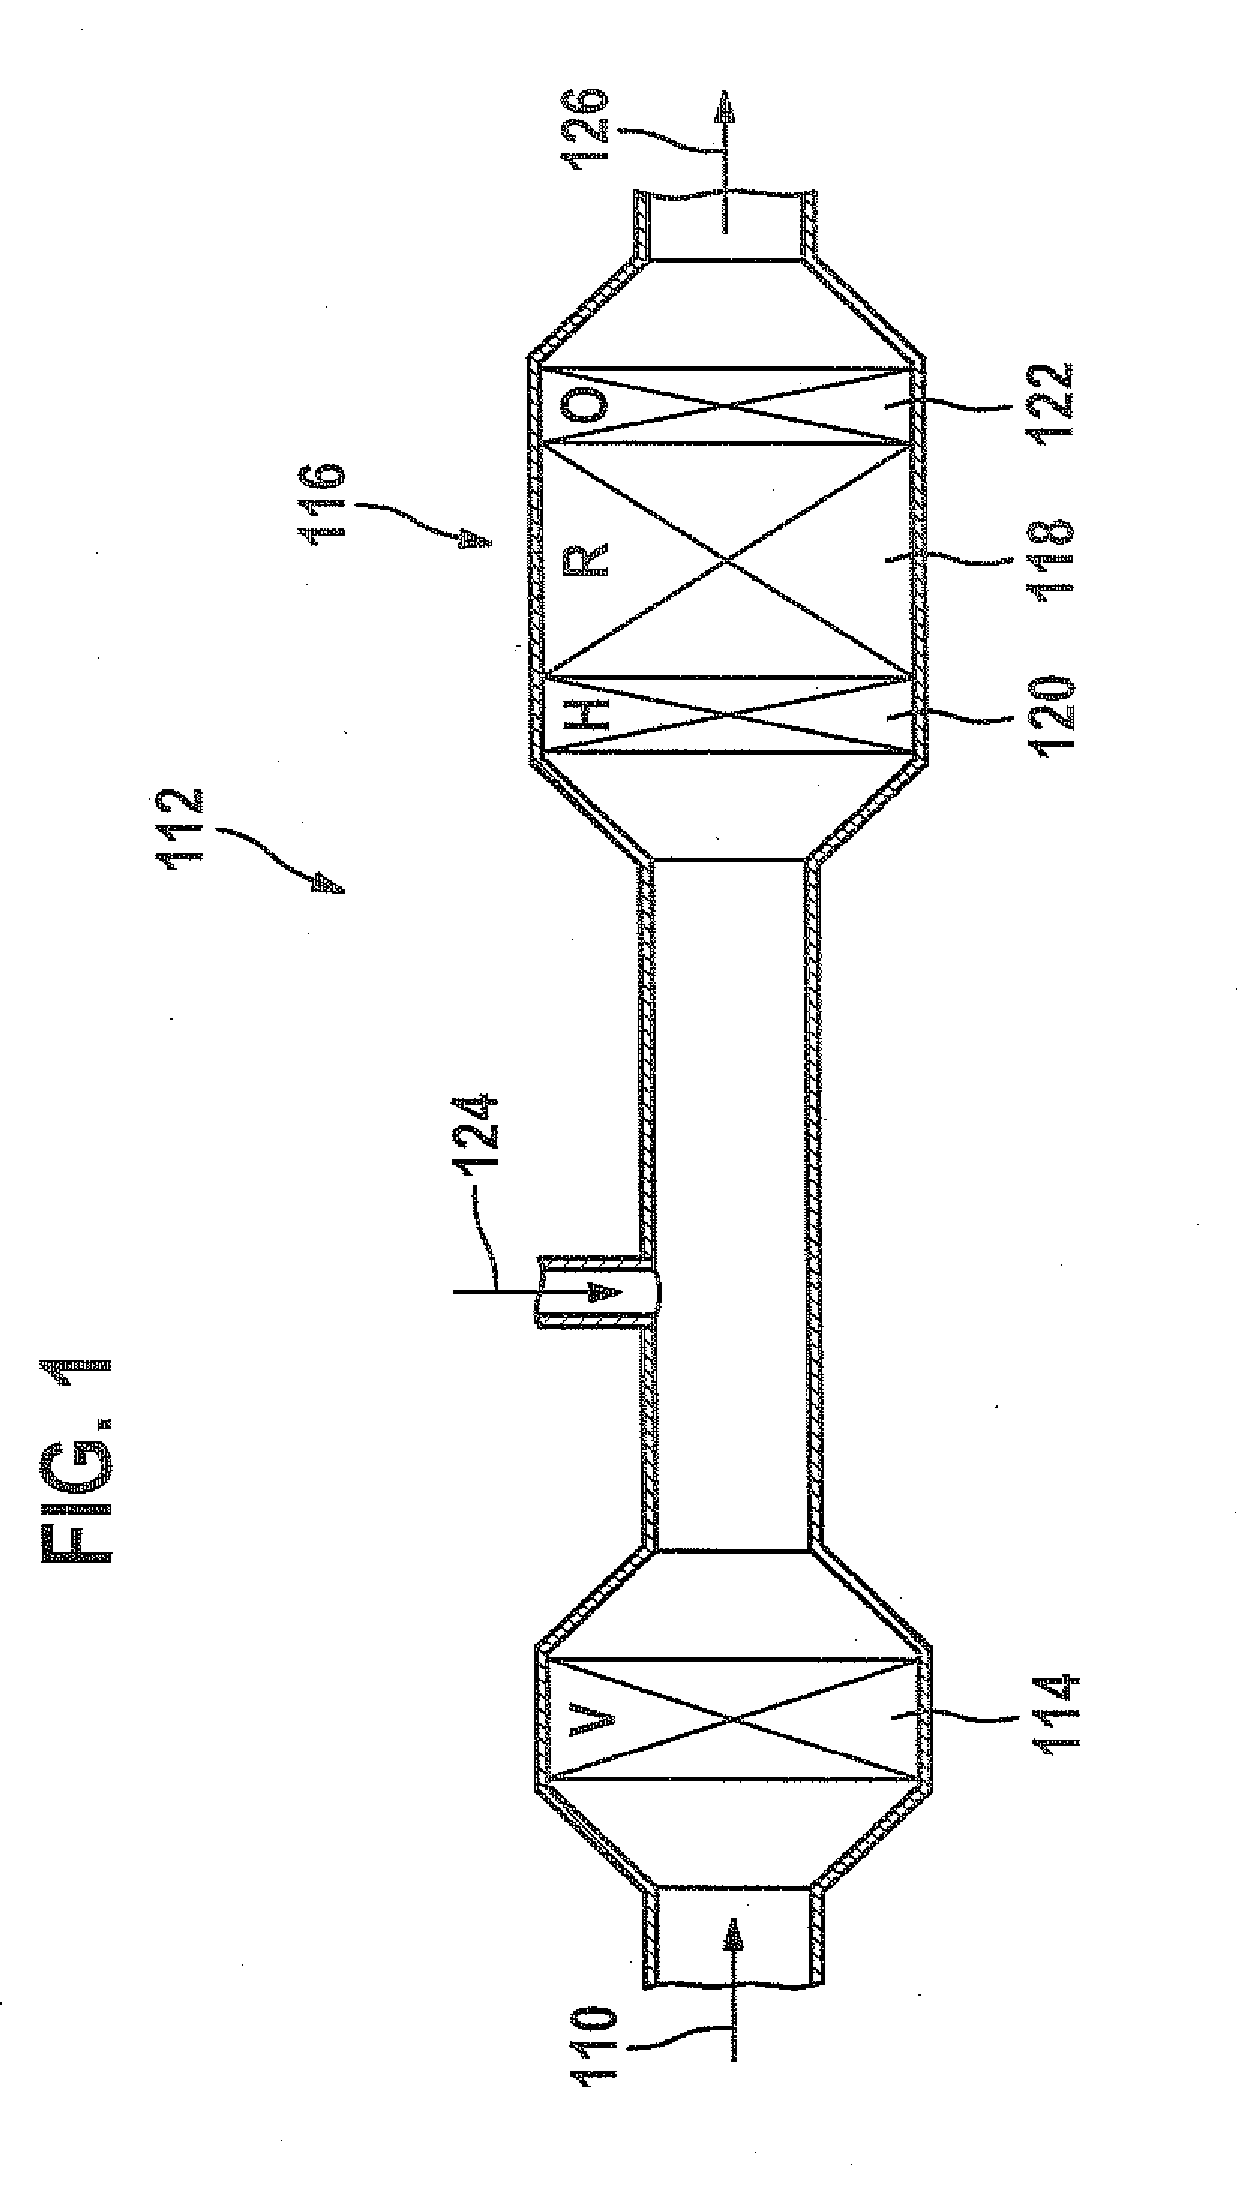 Method and metering system for reducing pollutants in motor vehicle exhaust gases